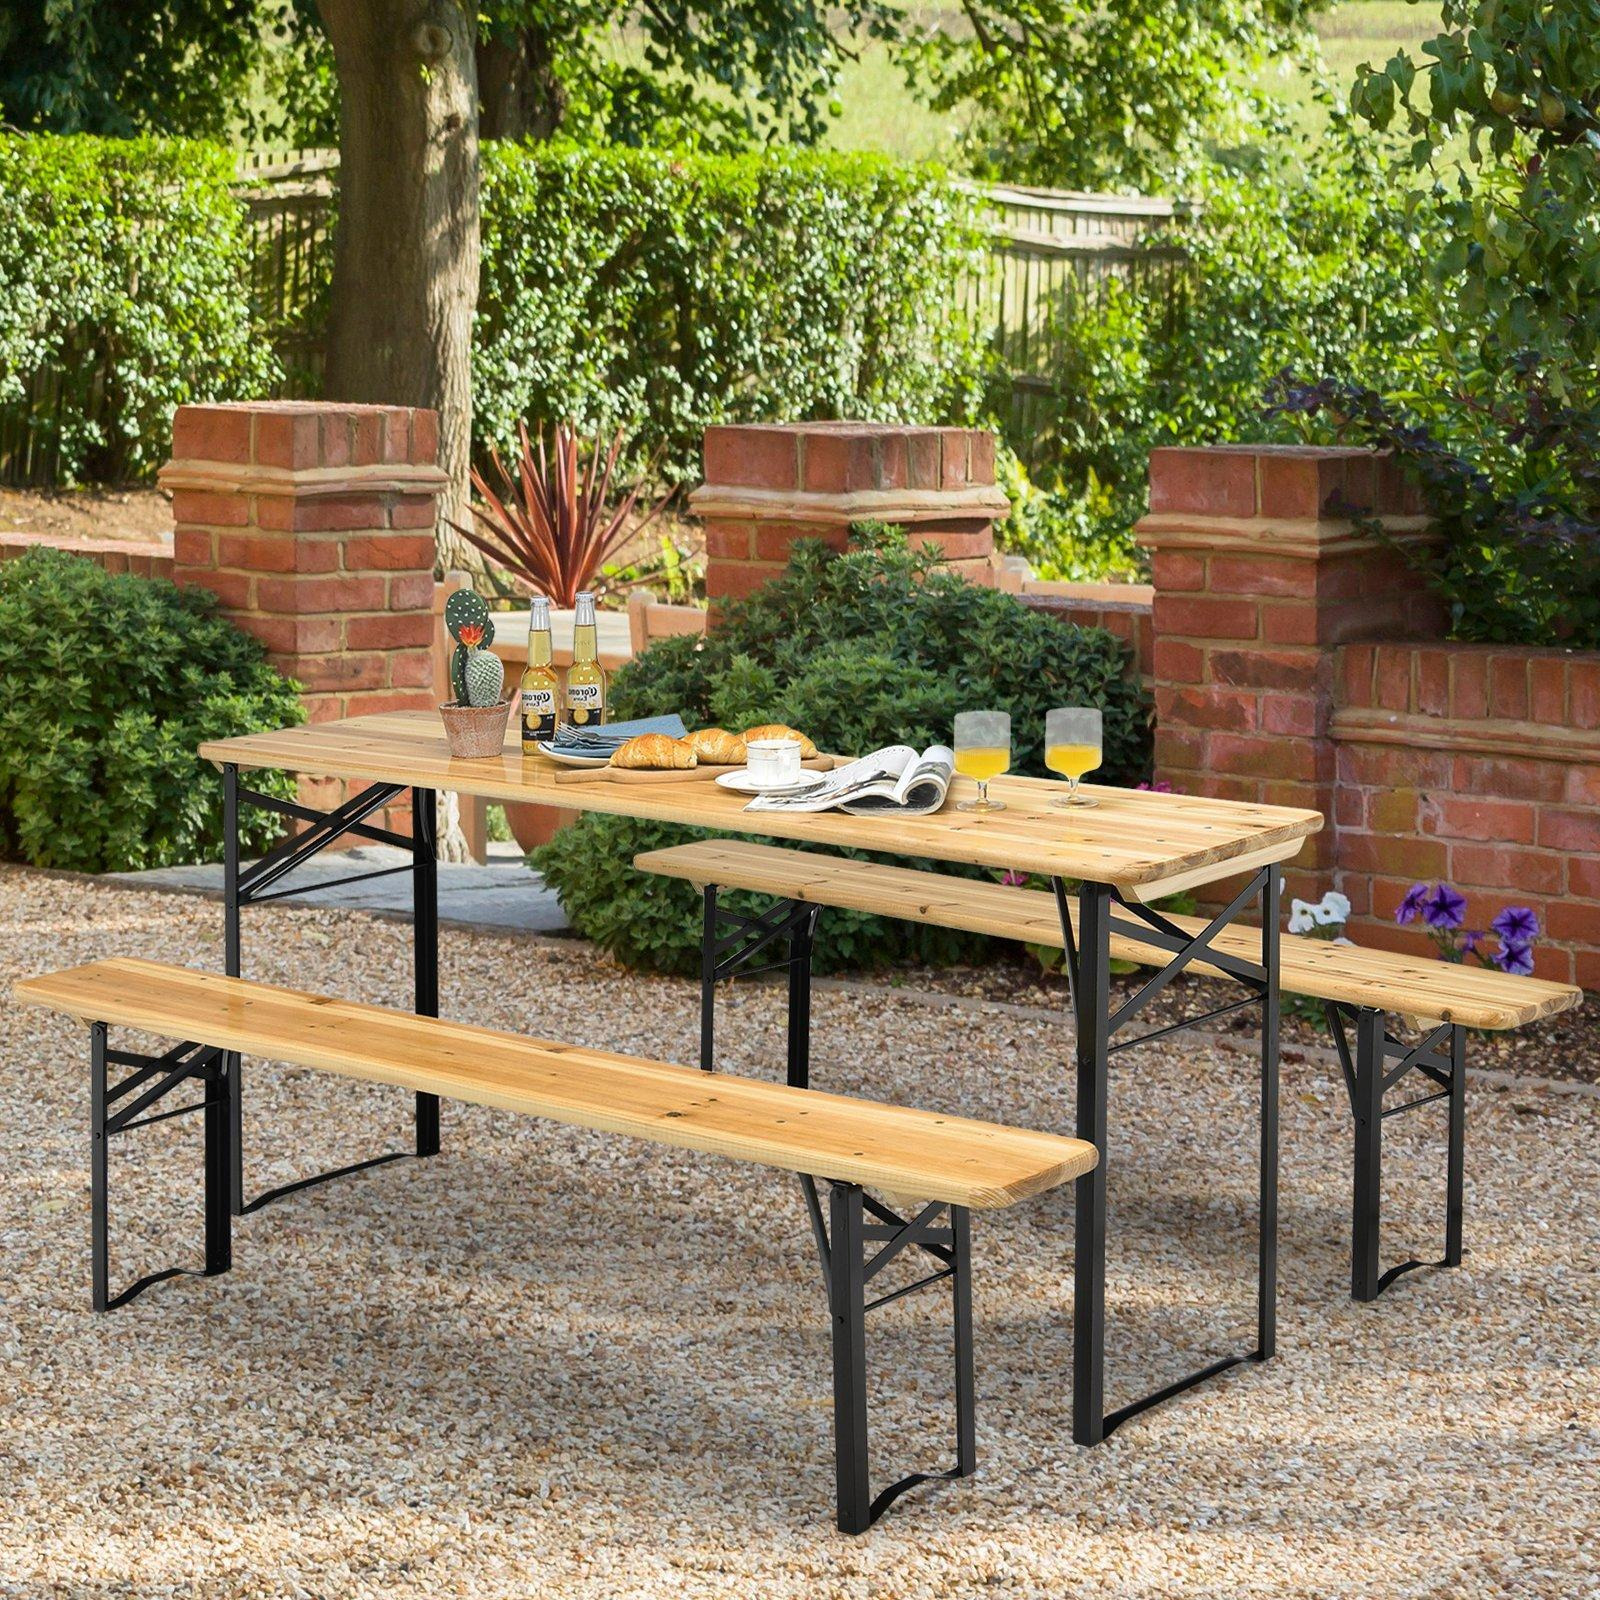 3-Piece Folding Picnic Table and Bench Set Wooden Dinning Table with Seat Set - image 1